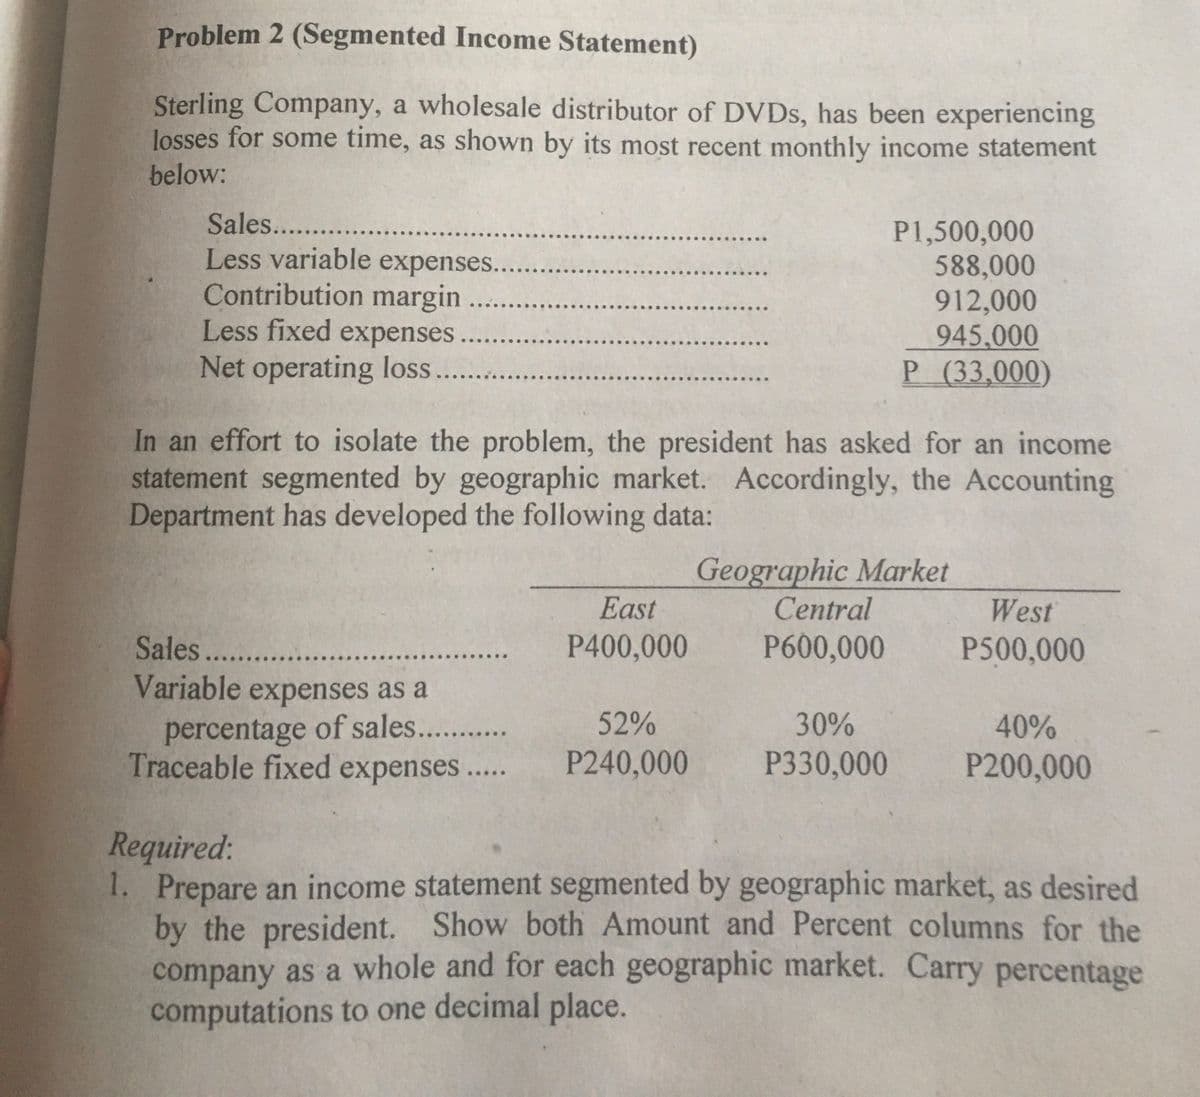 Problem 2 (Segmented Income Statement)
Sterling Company, a wholesale distributor of DVDS, has been experiencing
losses for some time, as shown by its most recent monthly income statement
below:
Sales....
Less variable expenses....
Contribution margin
Less fixed expenses.
Net operating loss...
P1,500,000
588,000
912,000
945,000
P (33,000)
In an effort to isolate the problem, the president has asked for an income
statement segmented by geographic market. Accordingly, the Accounting
Department has developed the following data:
Geographic Market
Central
East
West
Sales...
P400,000
P600,000
P500,000
Variable expenses as a
percentage of sales. .
Traceable fixed expenses....
52%
30%
40%
P240,000
P330,000
P200,000
Required:
1. Prepare an income statement segmented by geographic market, as desired
by the president. Show both Amount and Percent columns for the
company as a whole and for each geographic market. Carry percentage
computations to one decimal place.
